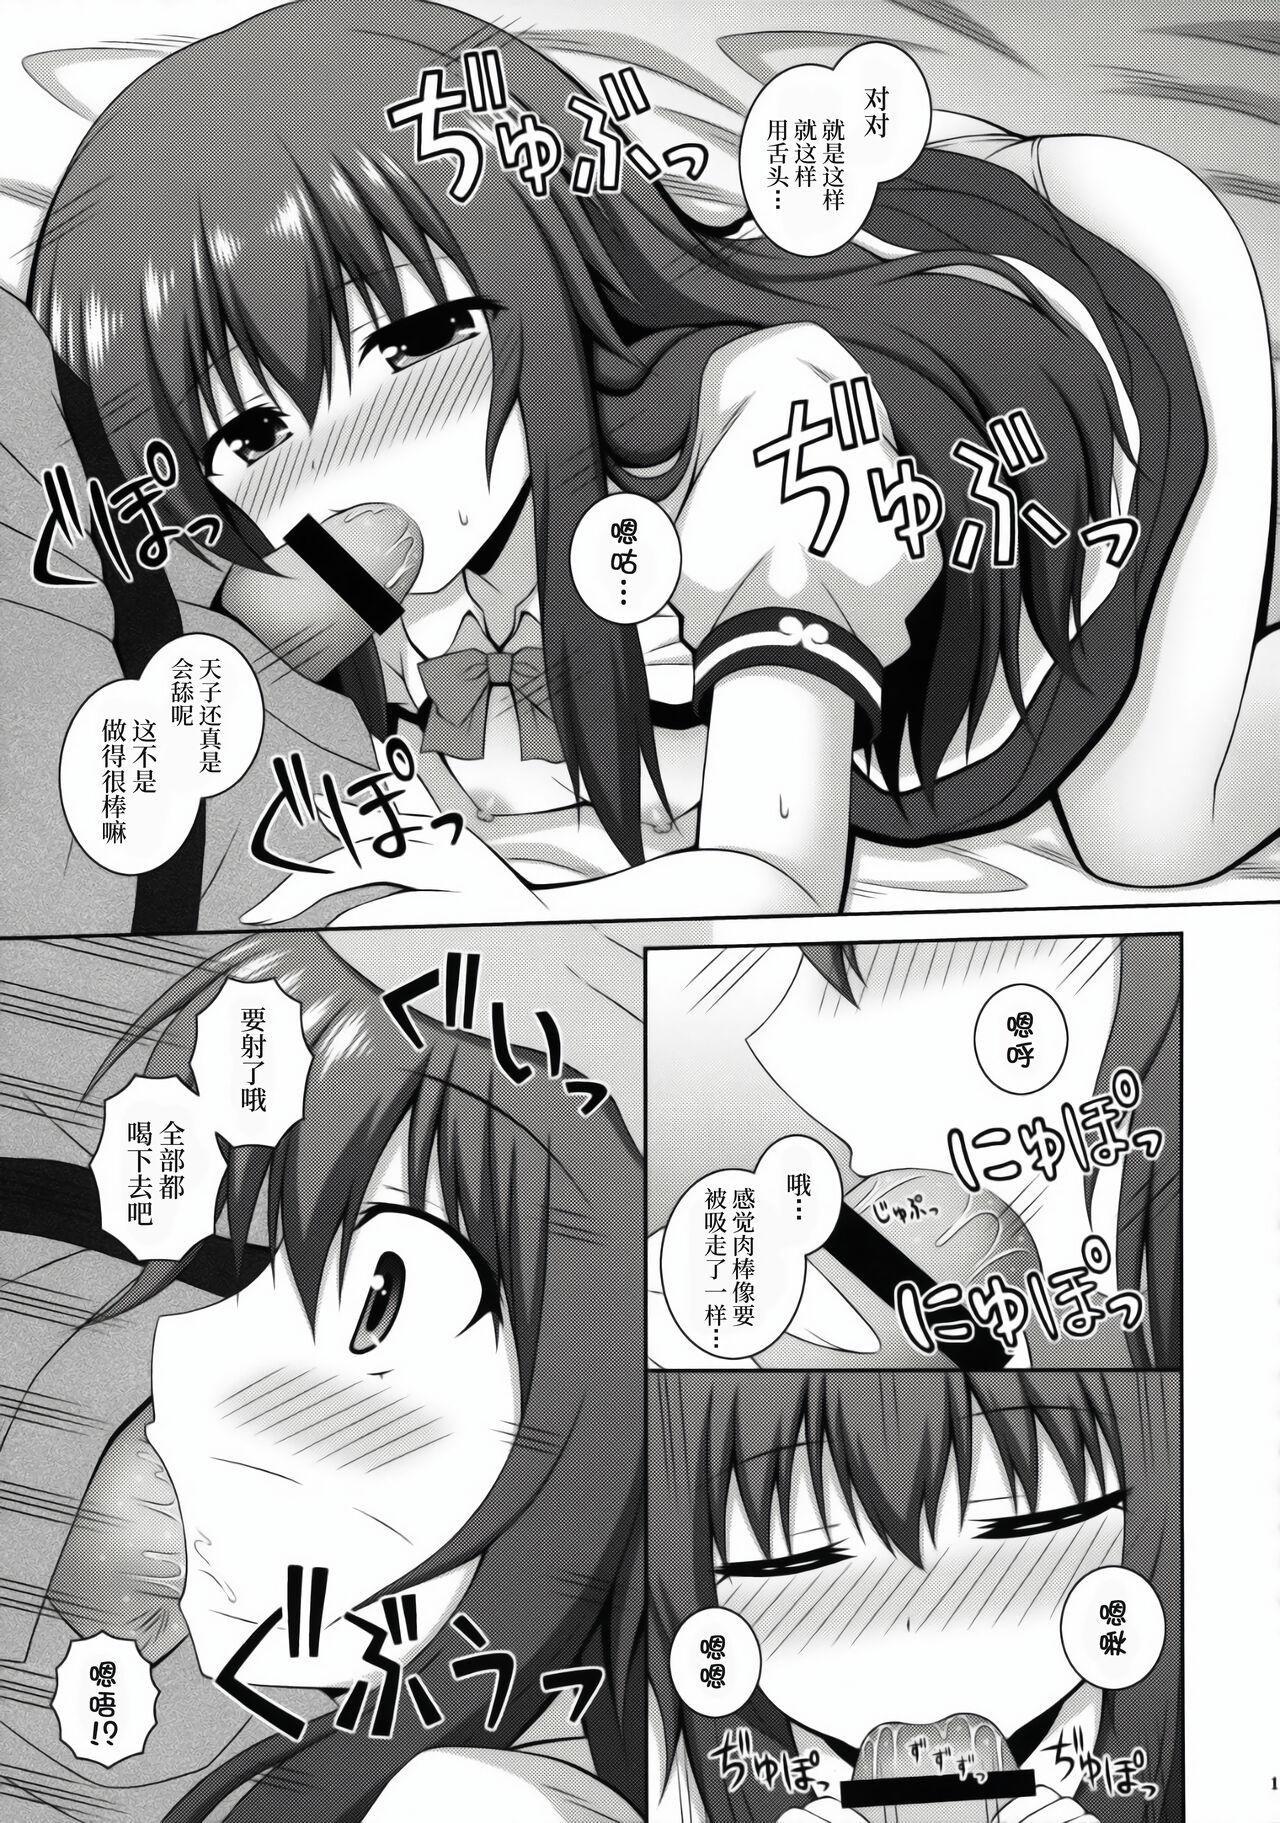 Chacal Selfish Angel | 任性的天使 - Touhou project Oral Sex - Page 11